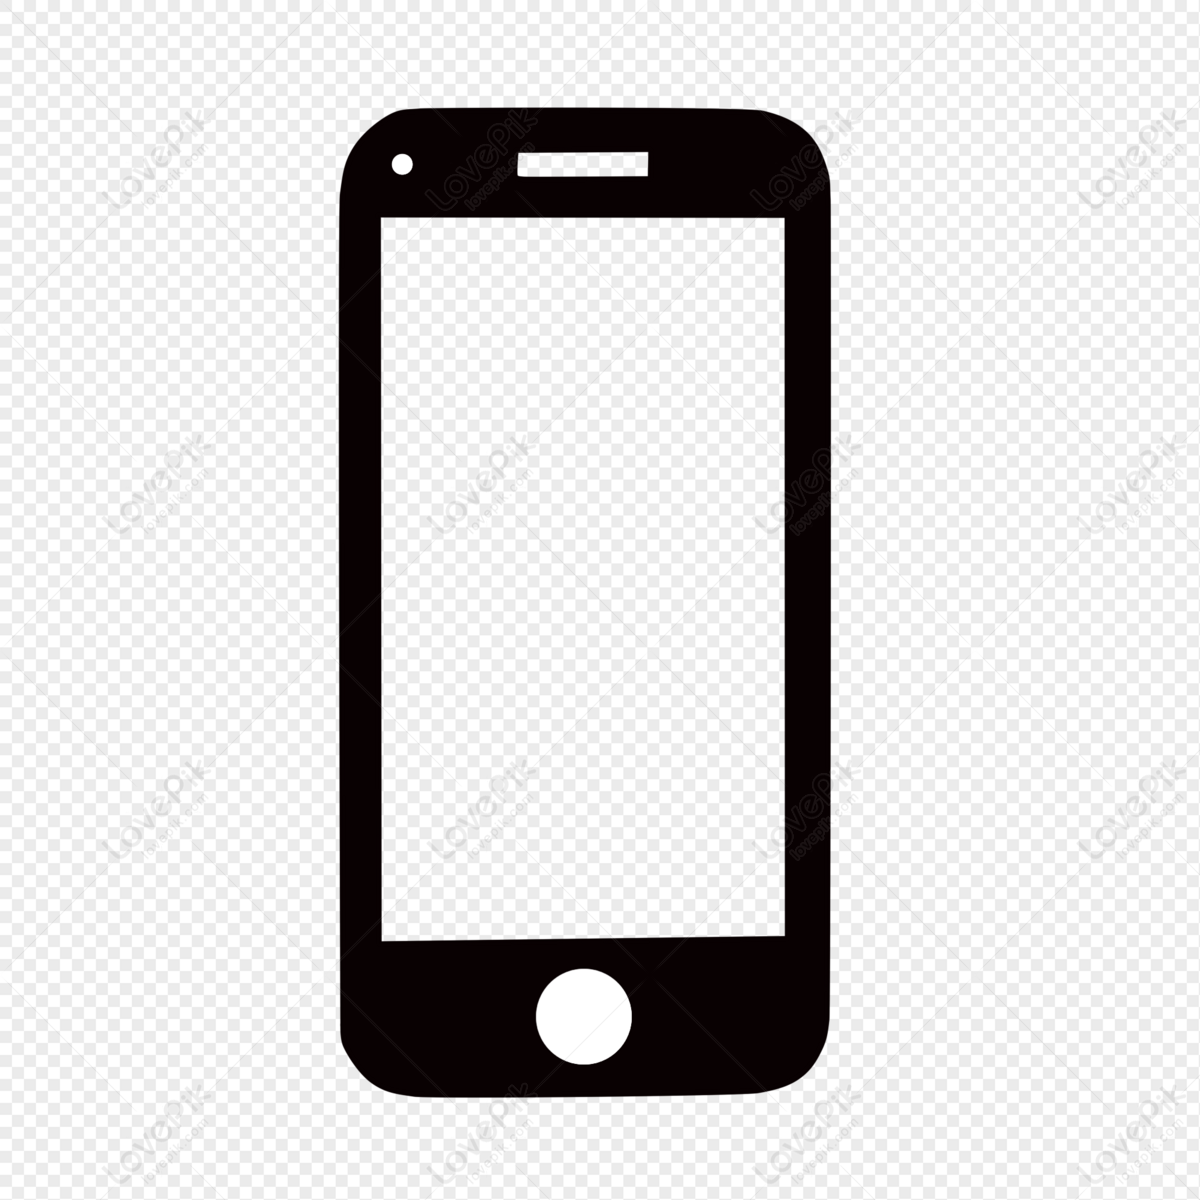 Mobile Phone Icon PNG White Transparent And Clipart Image For Free ...